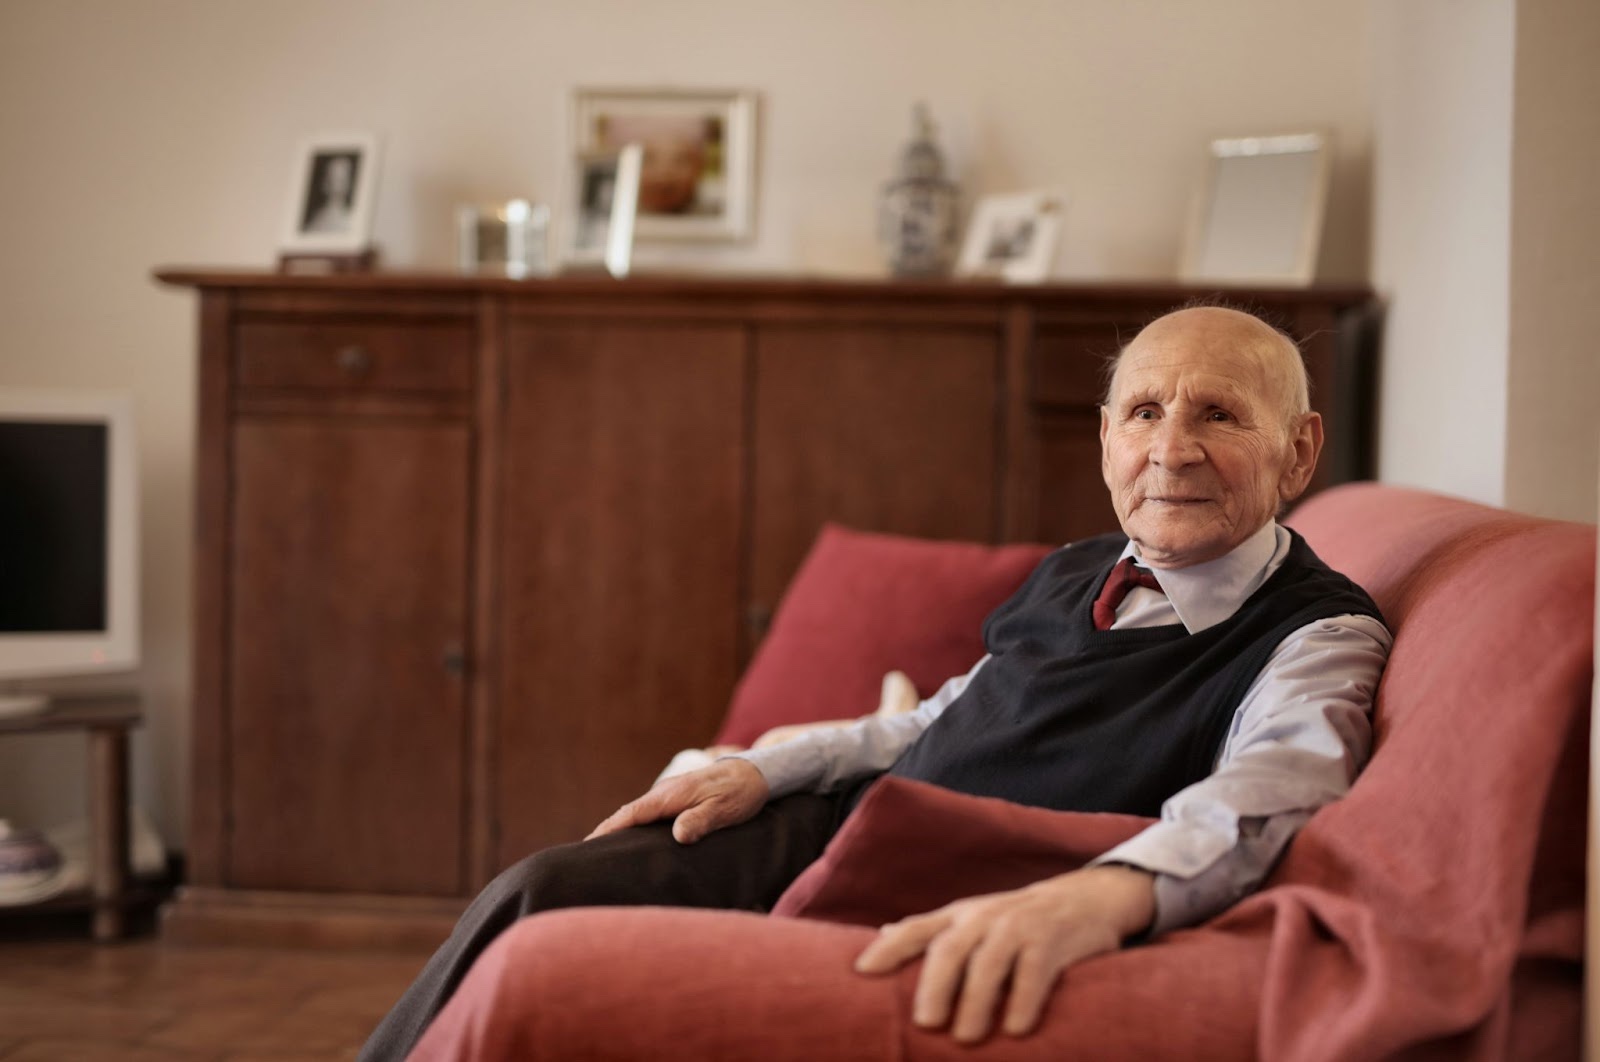 An elderly man in a sweater vest and neat shirt sits alone on a couch in a living room